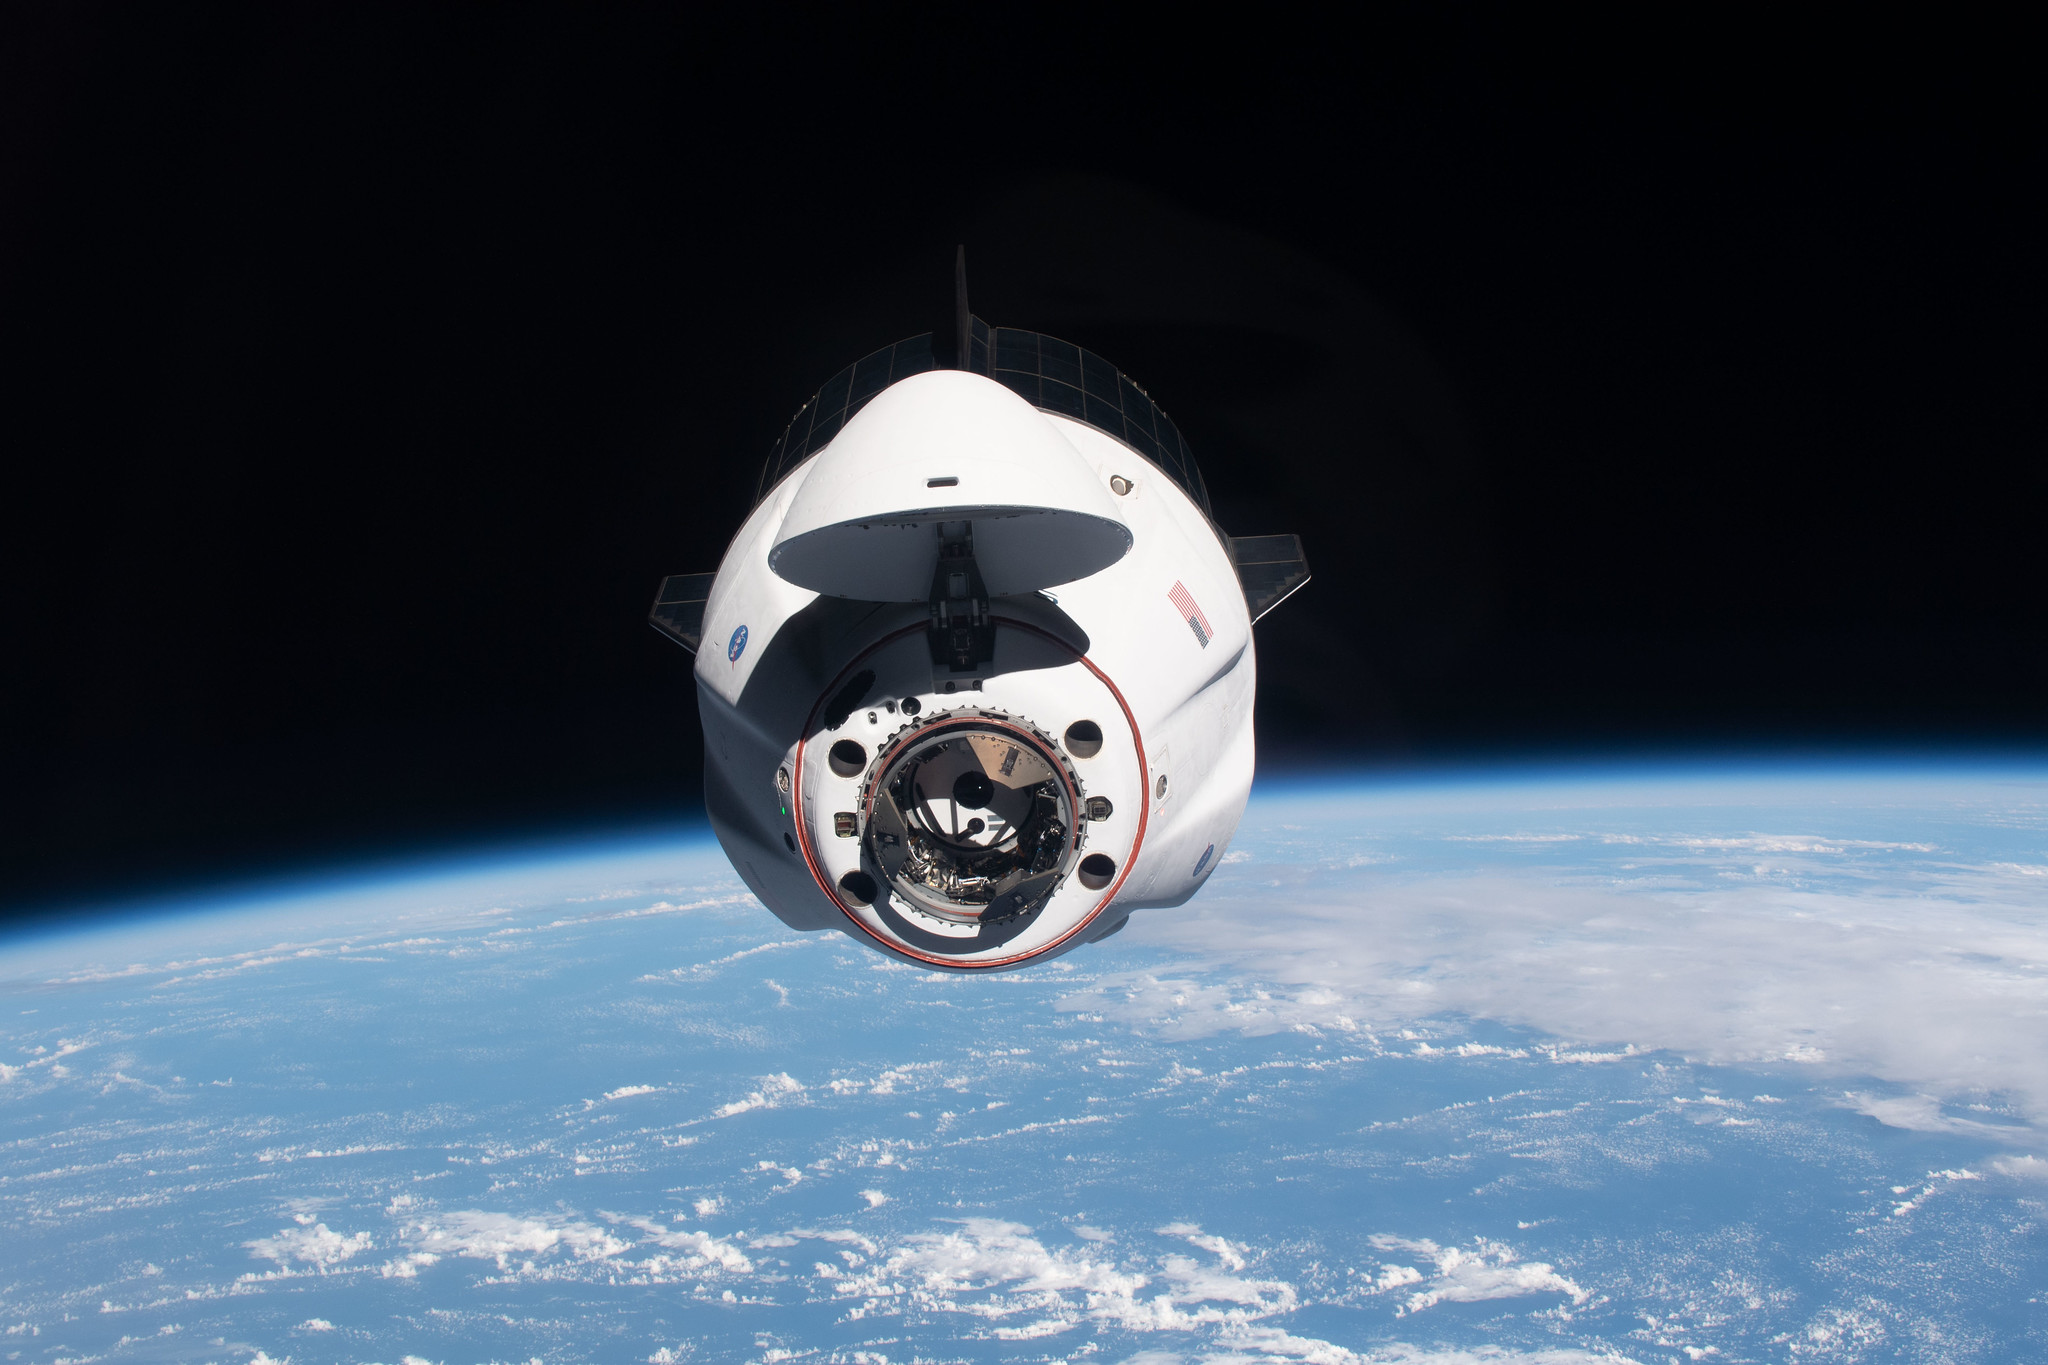 The SpaceX Crew Dragon Endeavour is pictured during its approach to the International Space Station April 24, 2021, less than one day after launching from Kennedy Space Center in Florida.